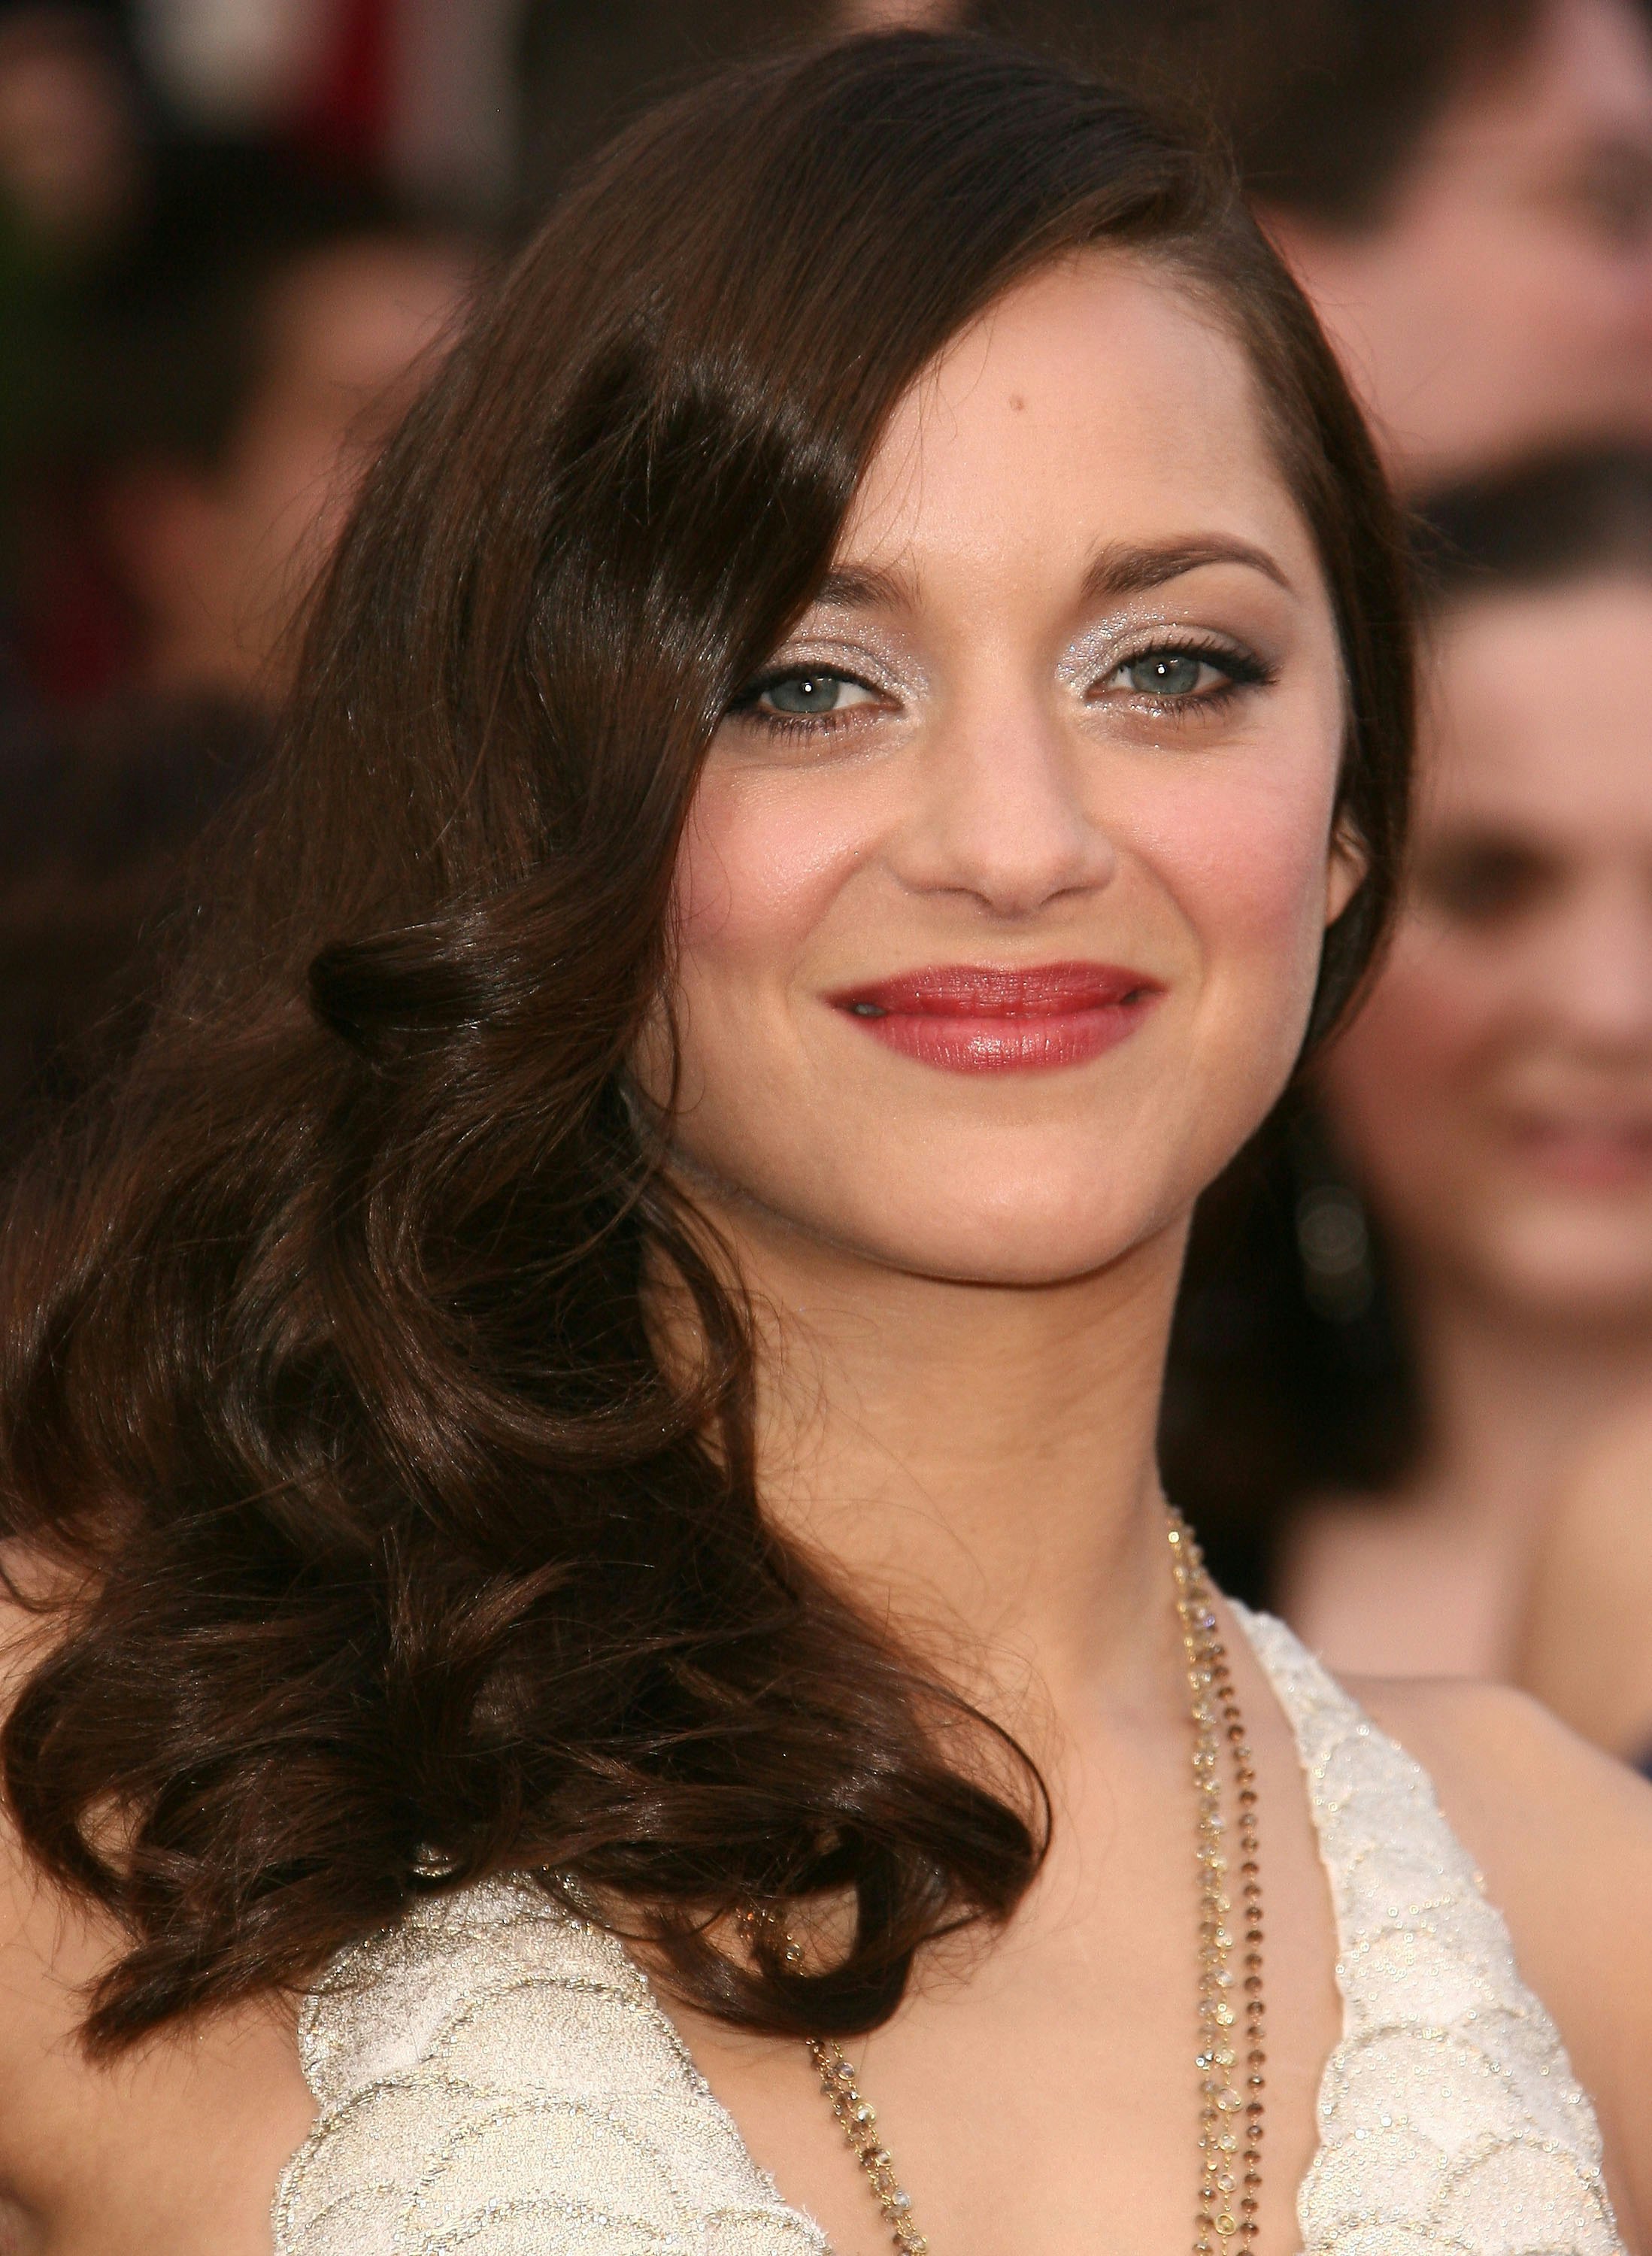 114205 actress Marion Cotillard Most Popular Celebs in 2015  Rare  Gallery HD Wallpapers